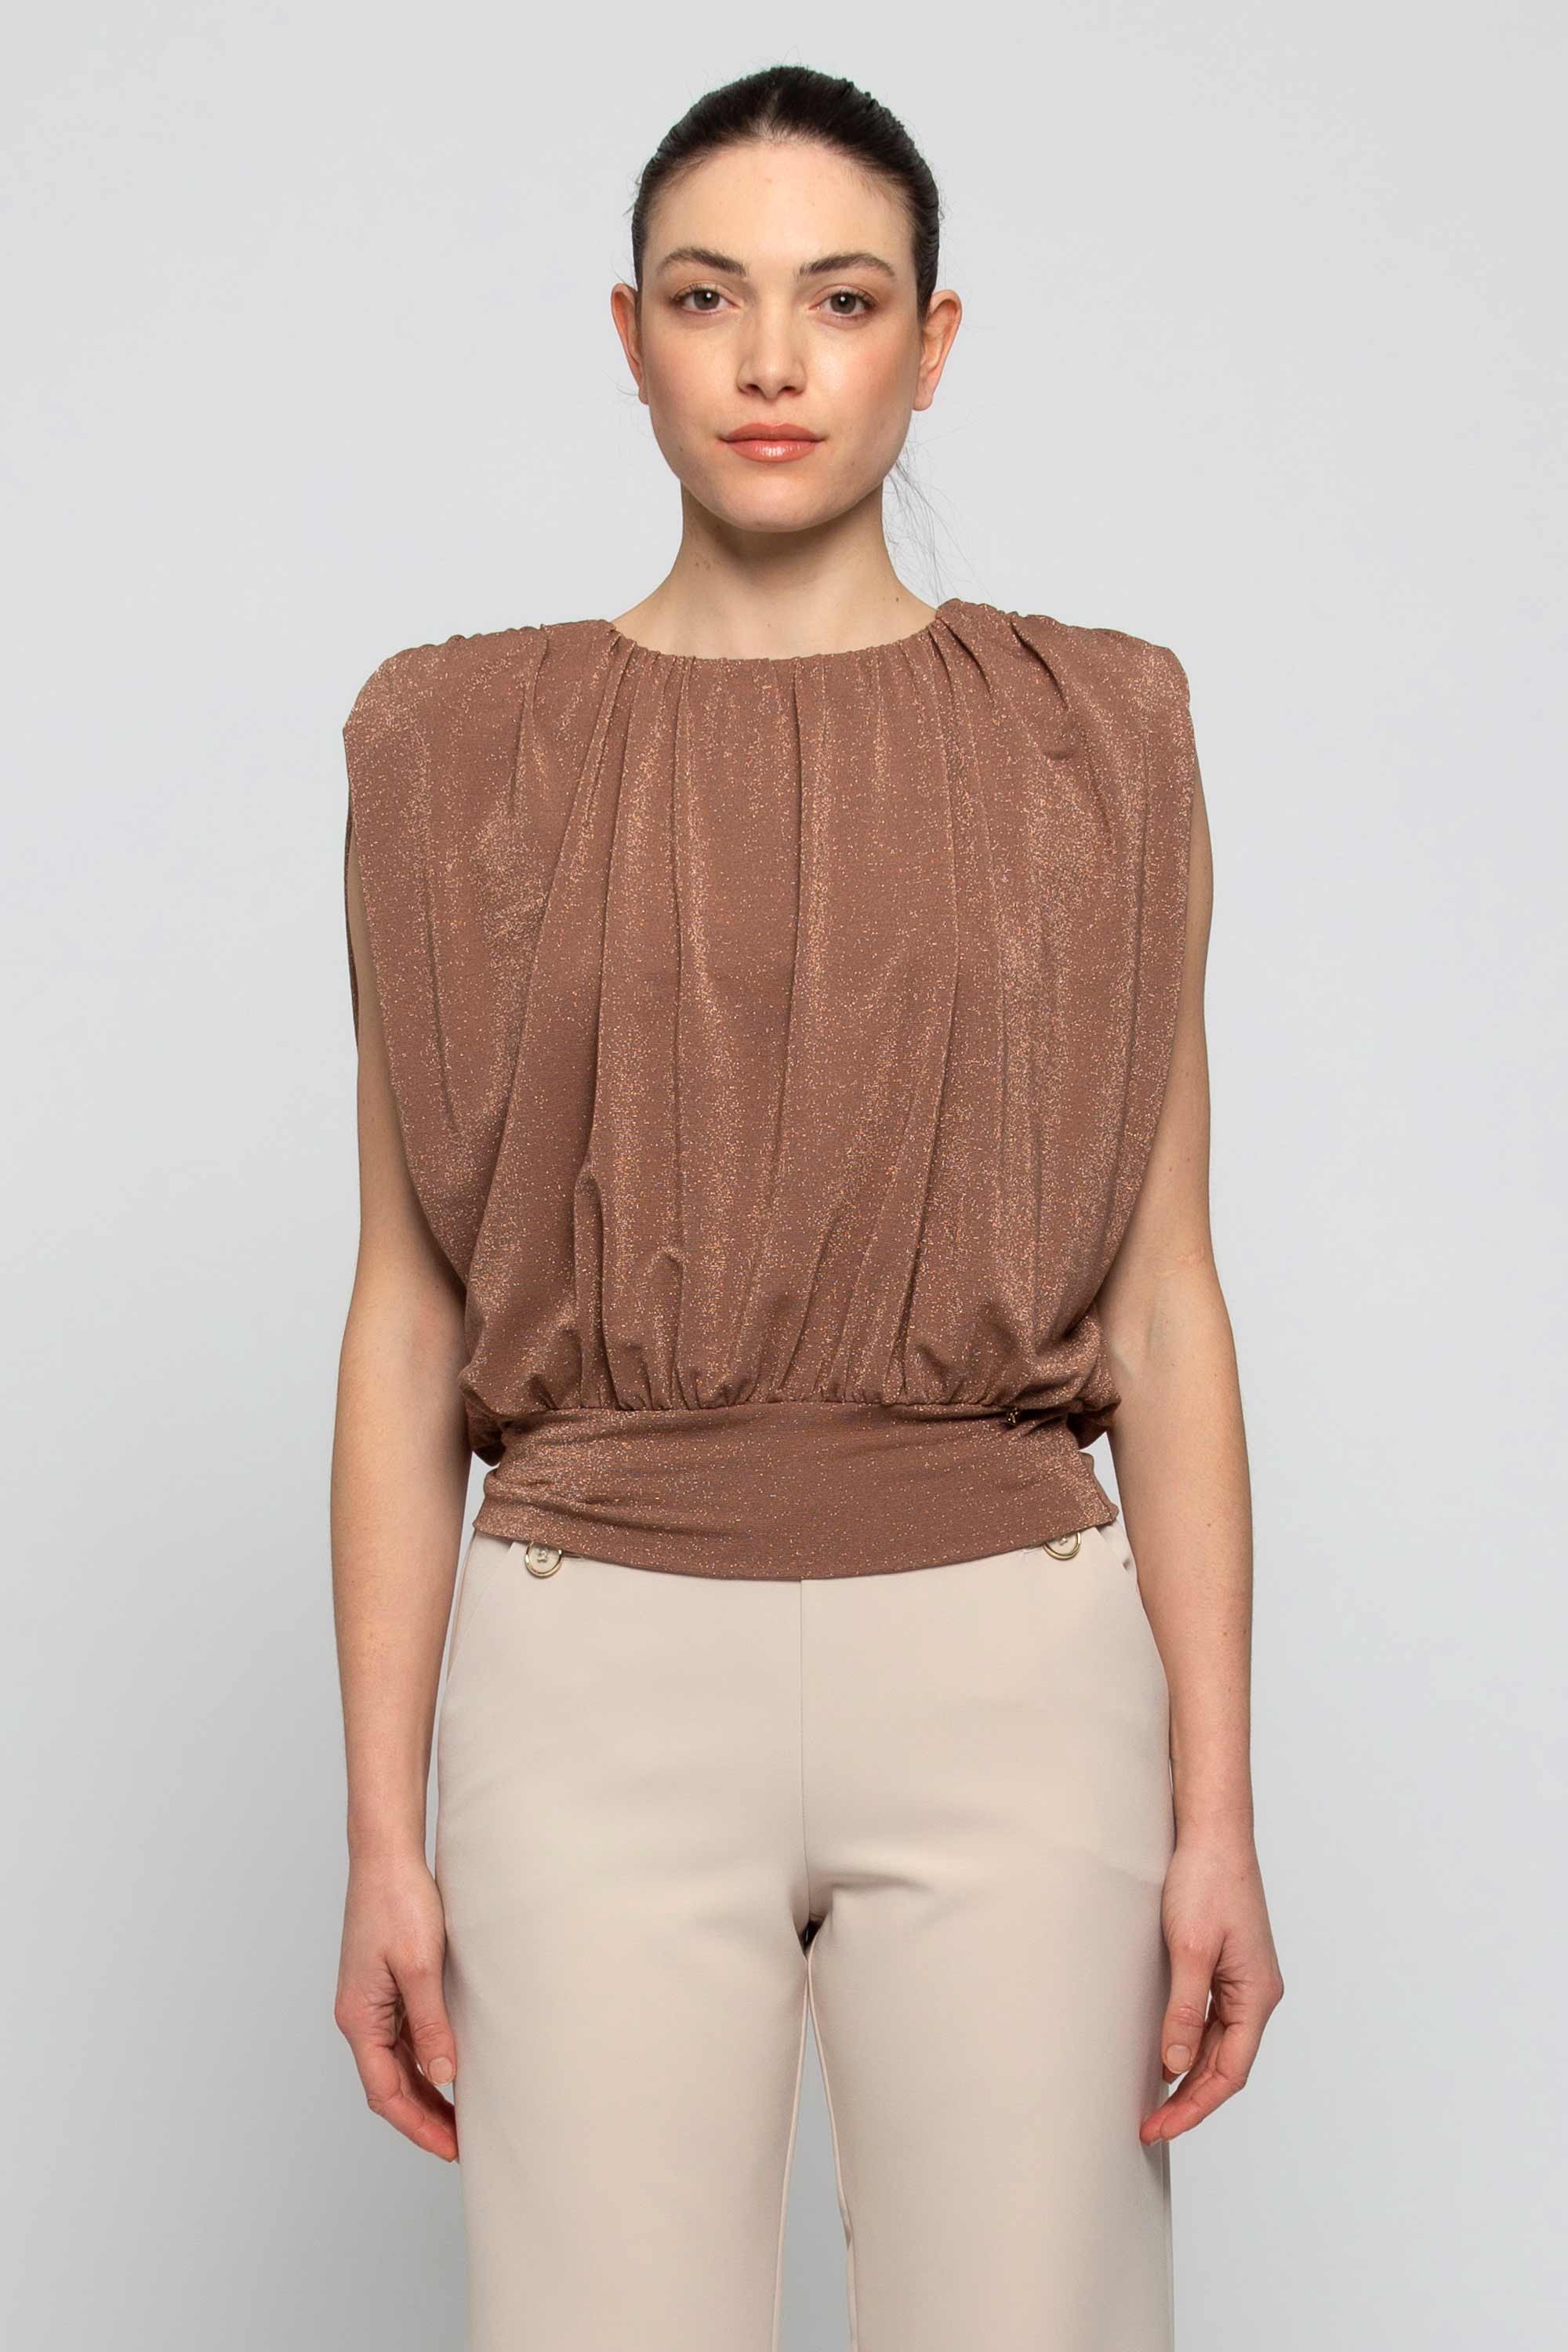 Nest fluit Tijdig Sleeveless blouse from the Gold Collection#Blouse RETHON | Kocca